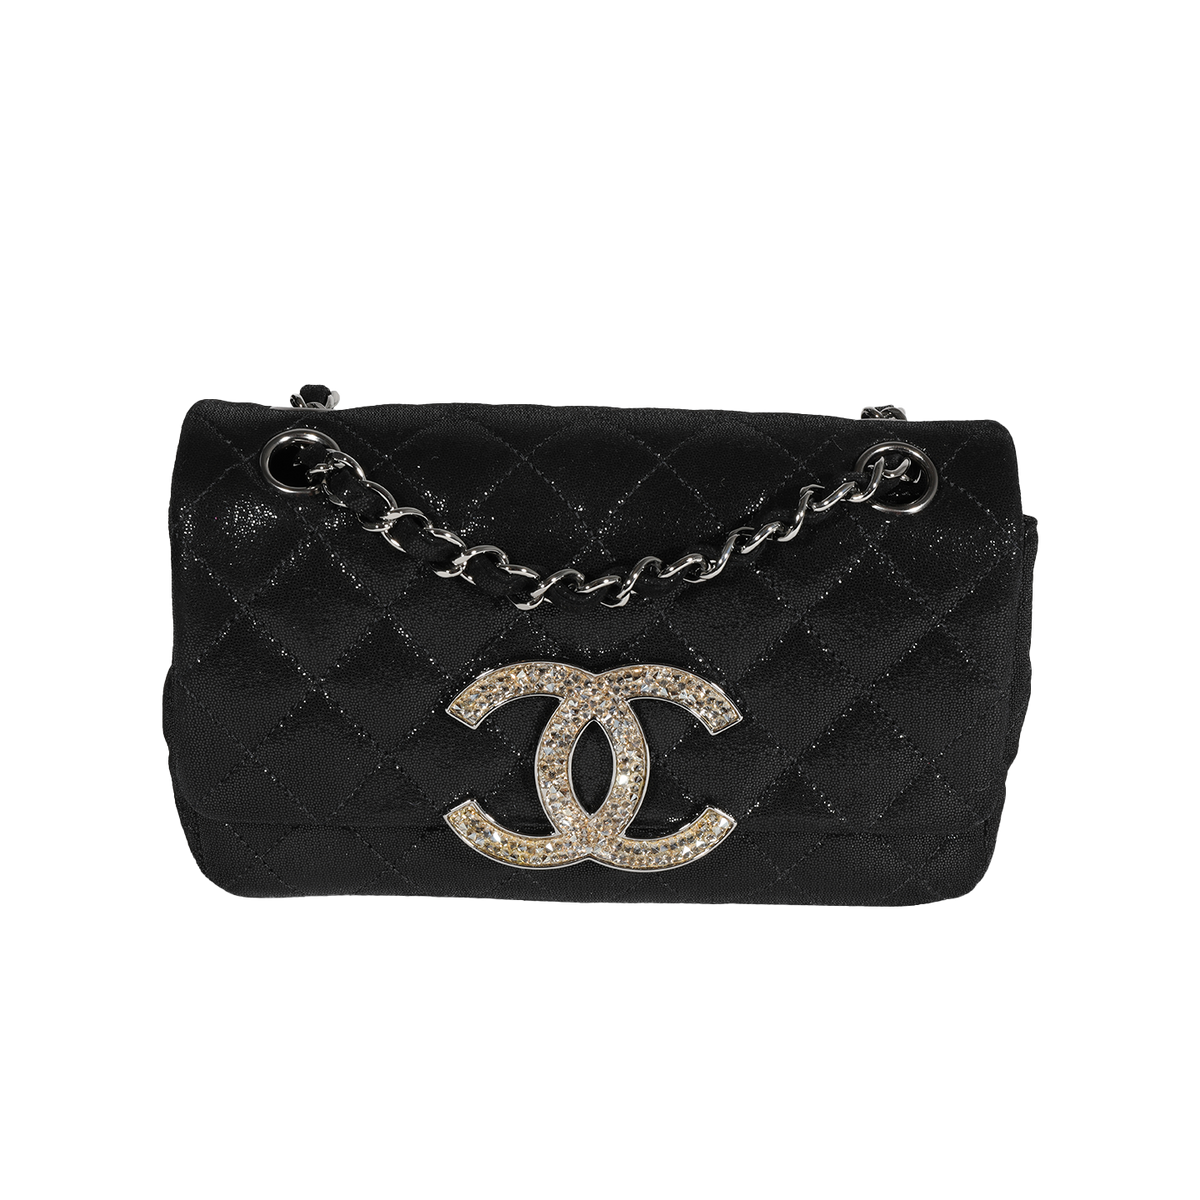 Chanel Black Quilted Nubuck Crystal CC Flap Bag